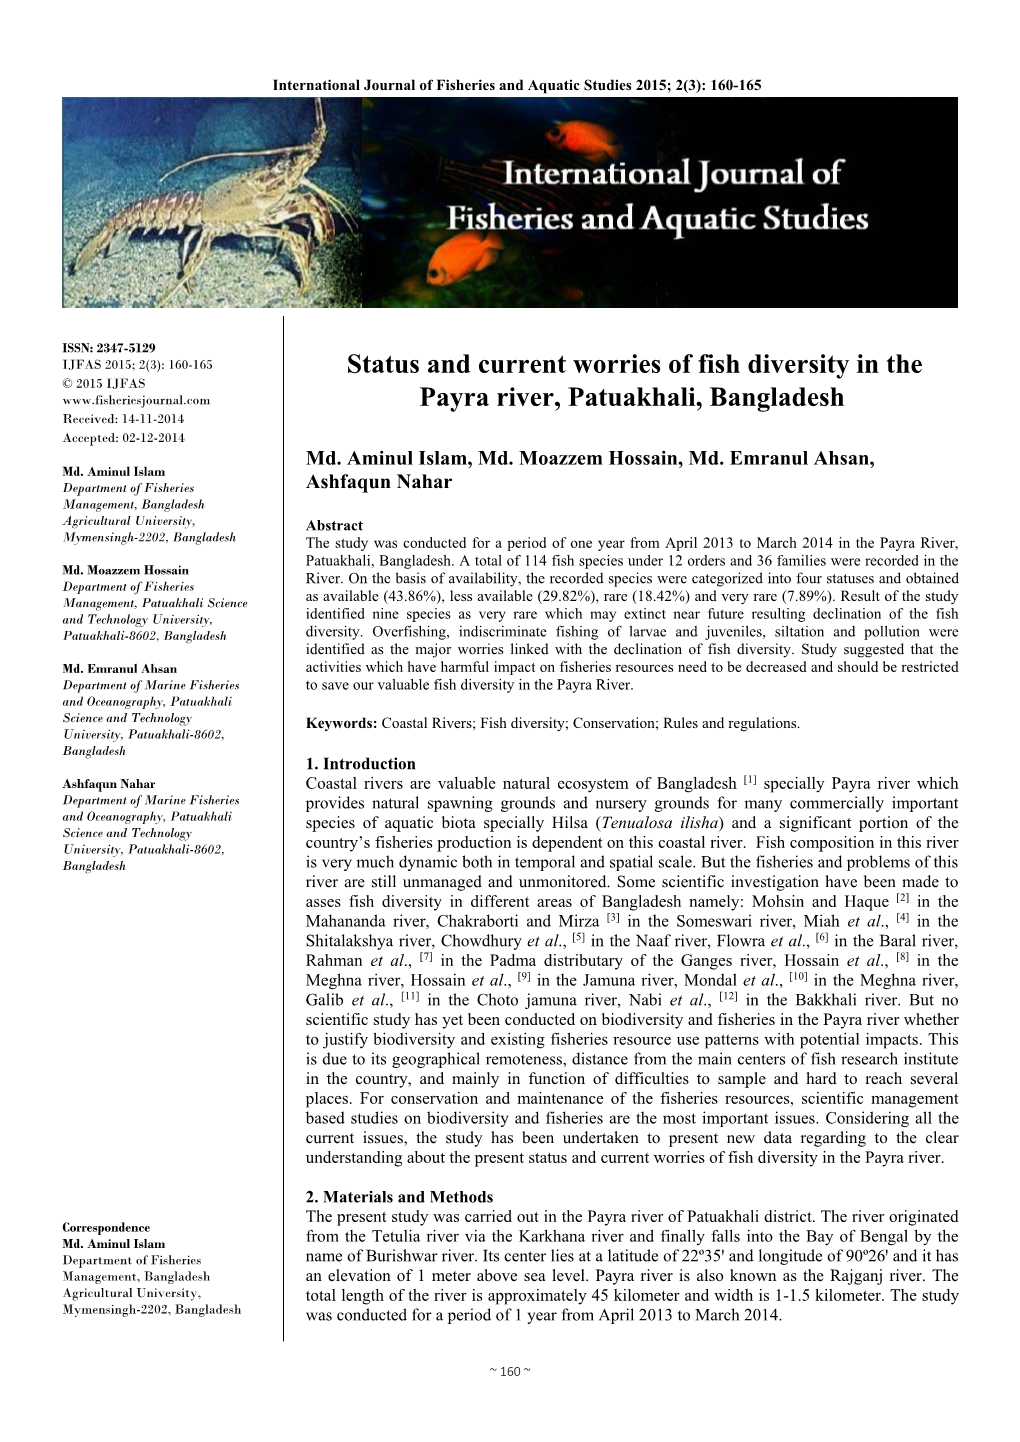 Status and Current Worries of Fish Diversity in the Payra River